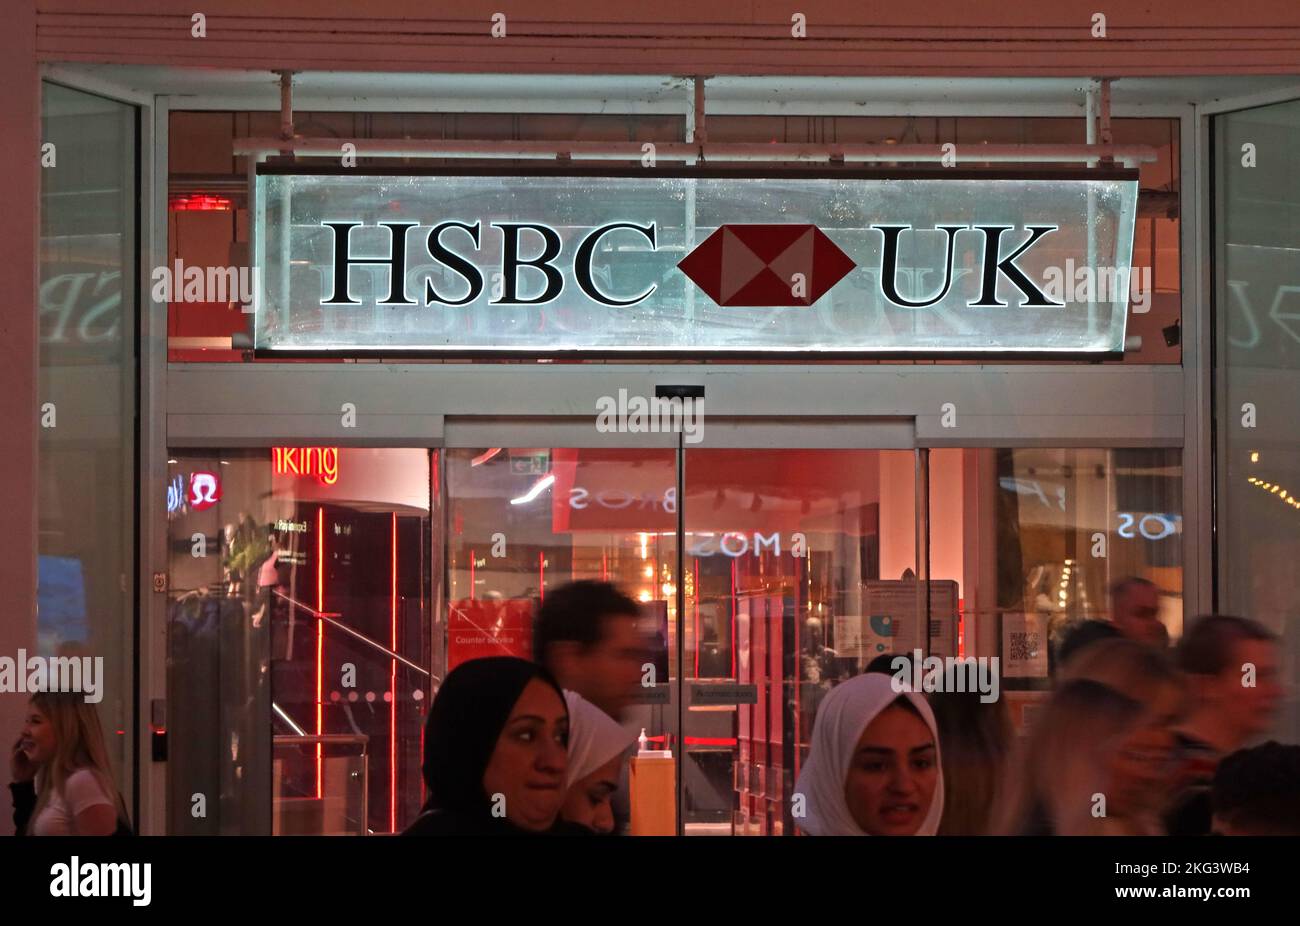 HSBC - Hong Kong Shanghai Banking Corporation filiale UK, 2-4 St Anns Square, Manchester, Inghilterra, Regno Unito, M2 7HD di notte Foto Stock